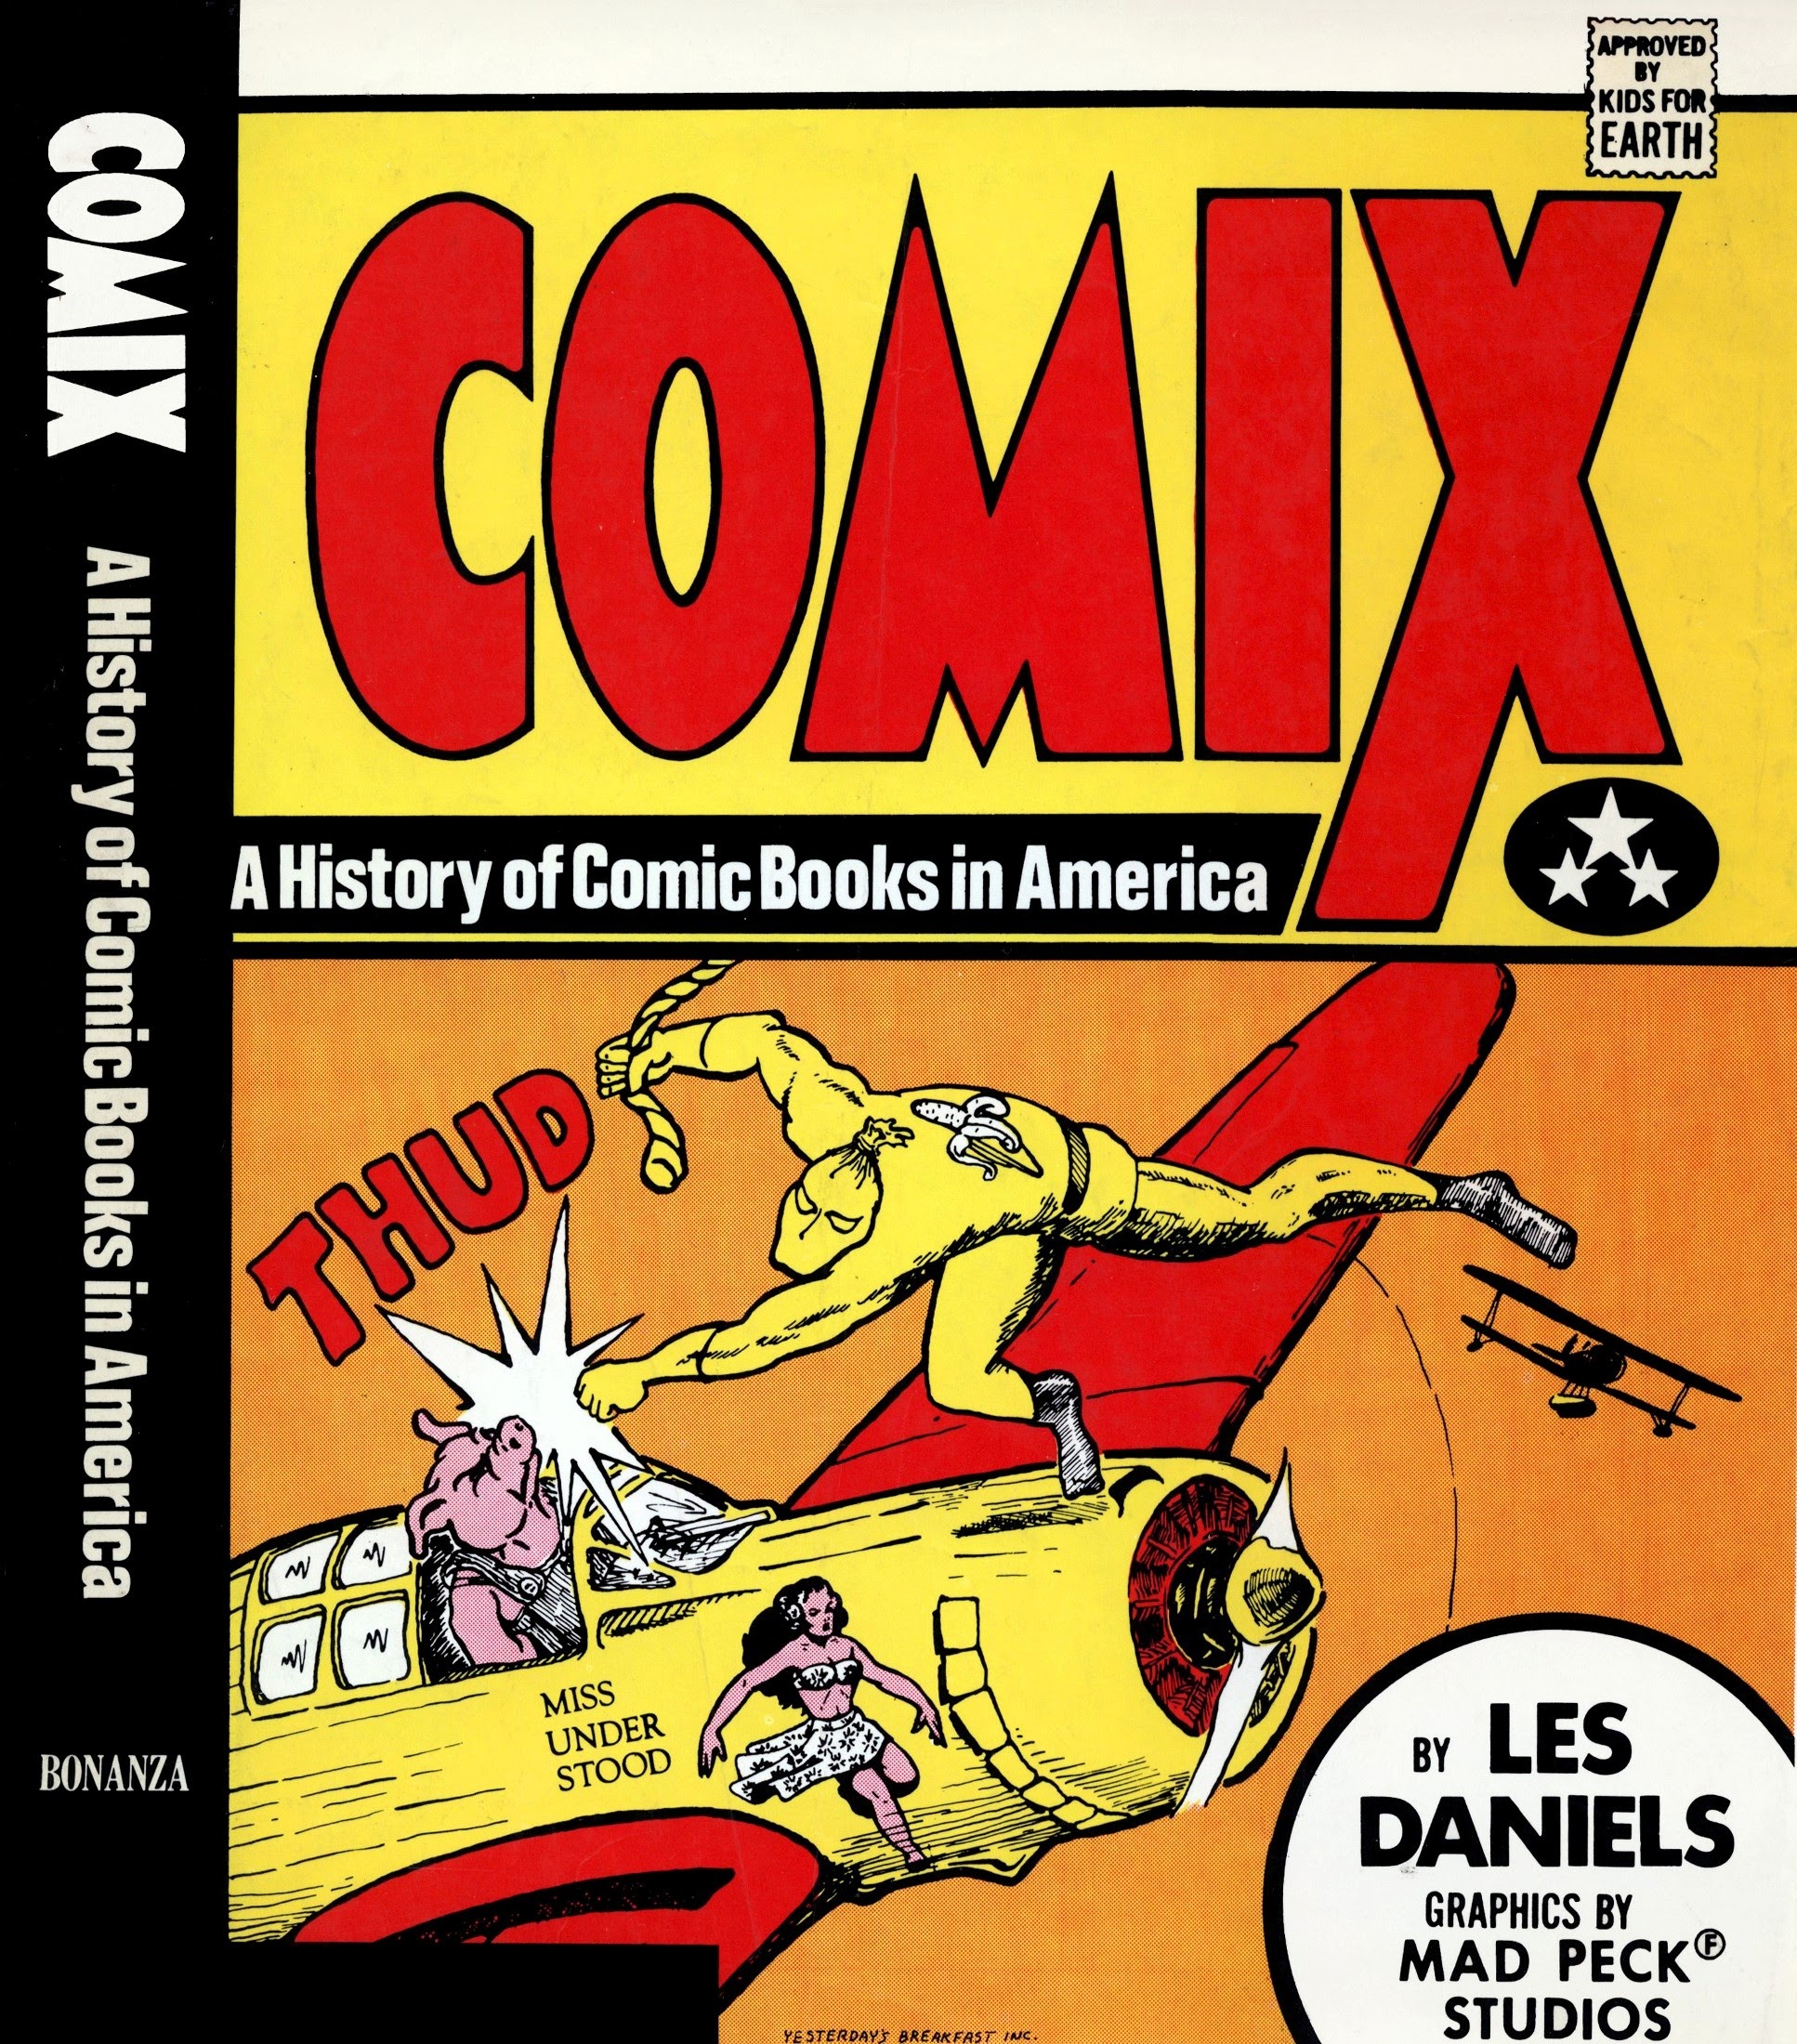 Read online Comix: A History of Comic Books in America comic -  Issue # TPB (Part 1) - 1